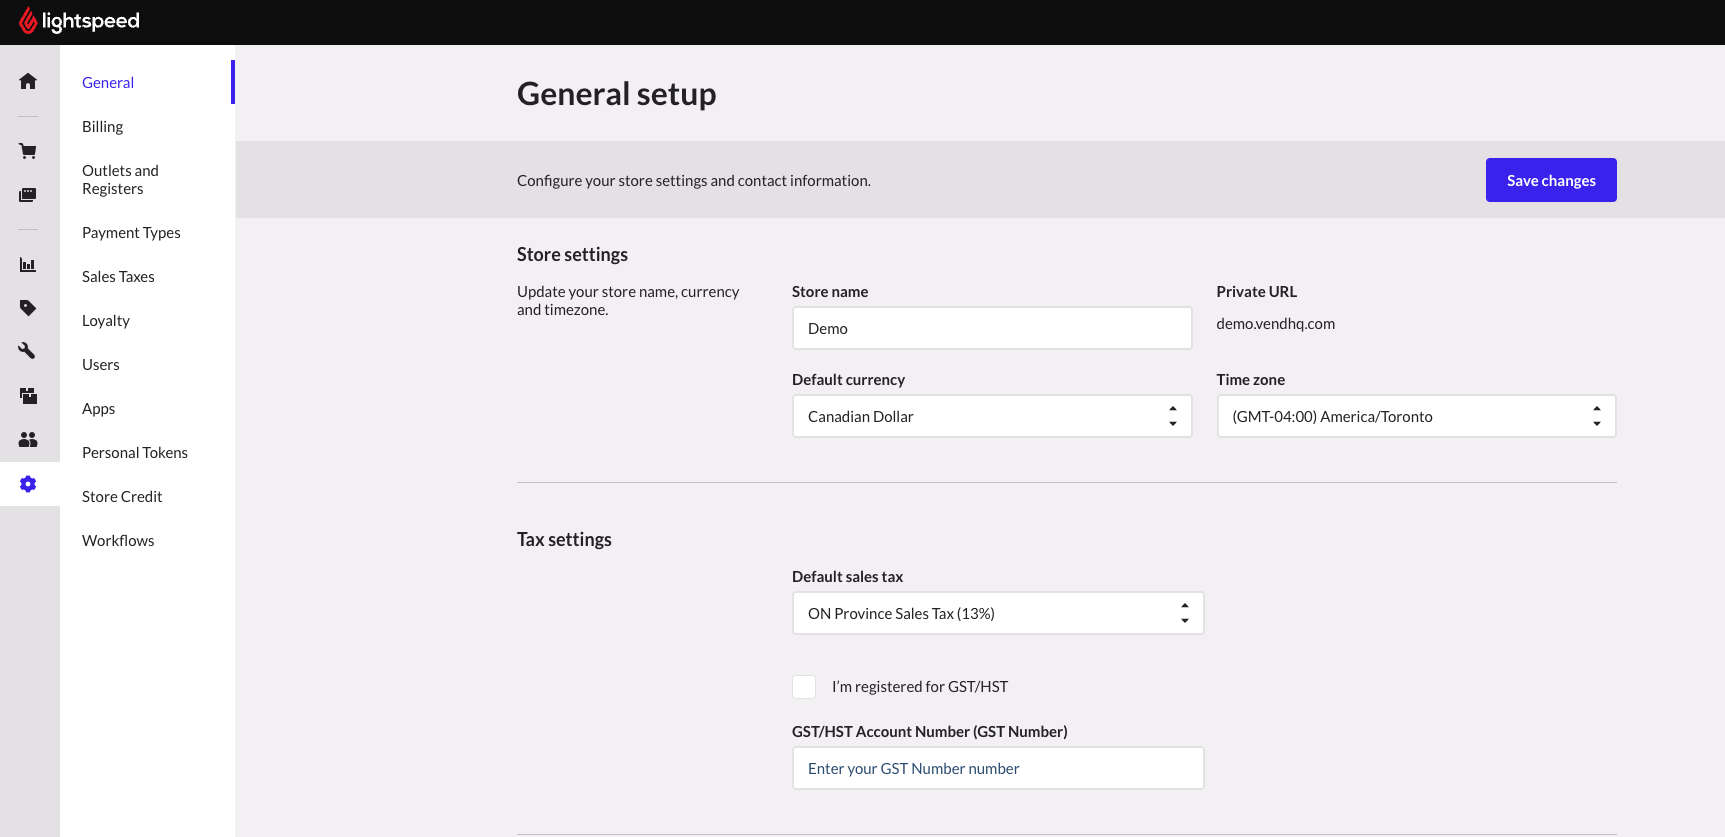 General settings page showing store settings and tax settings fields.